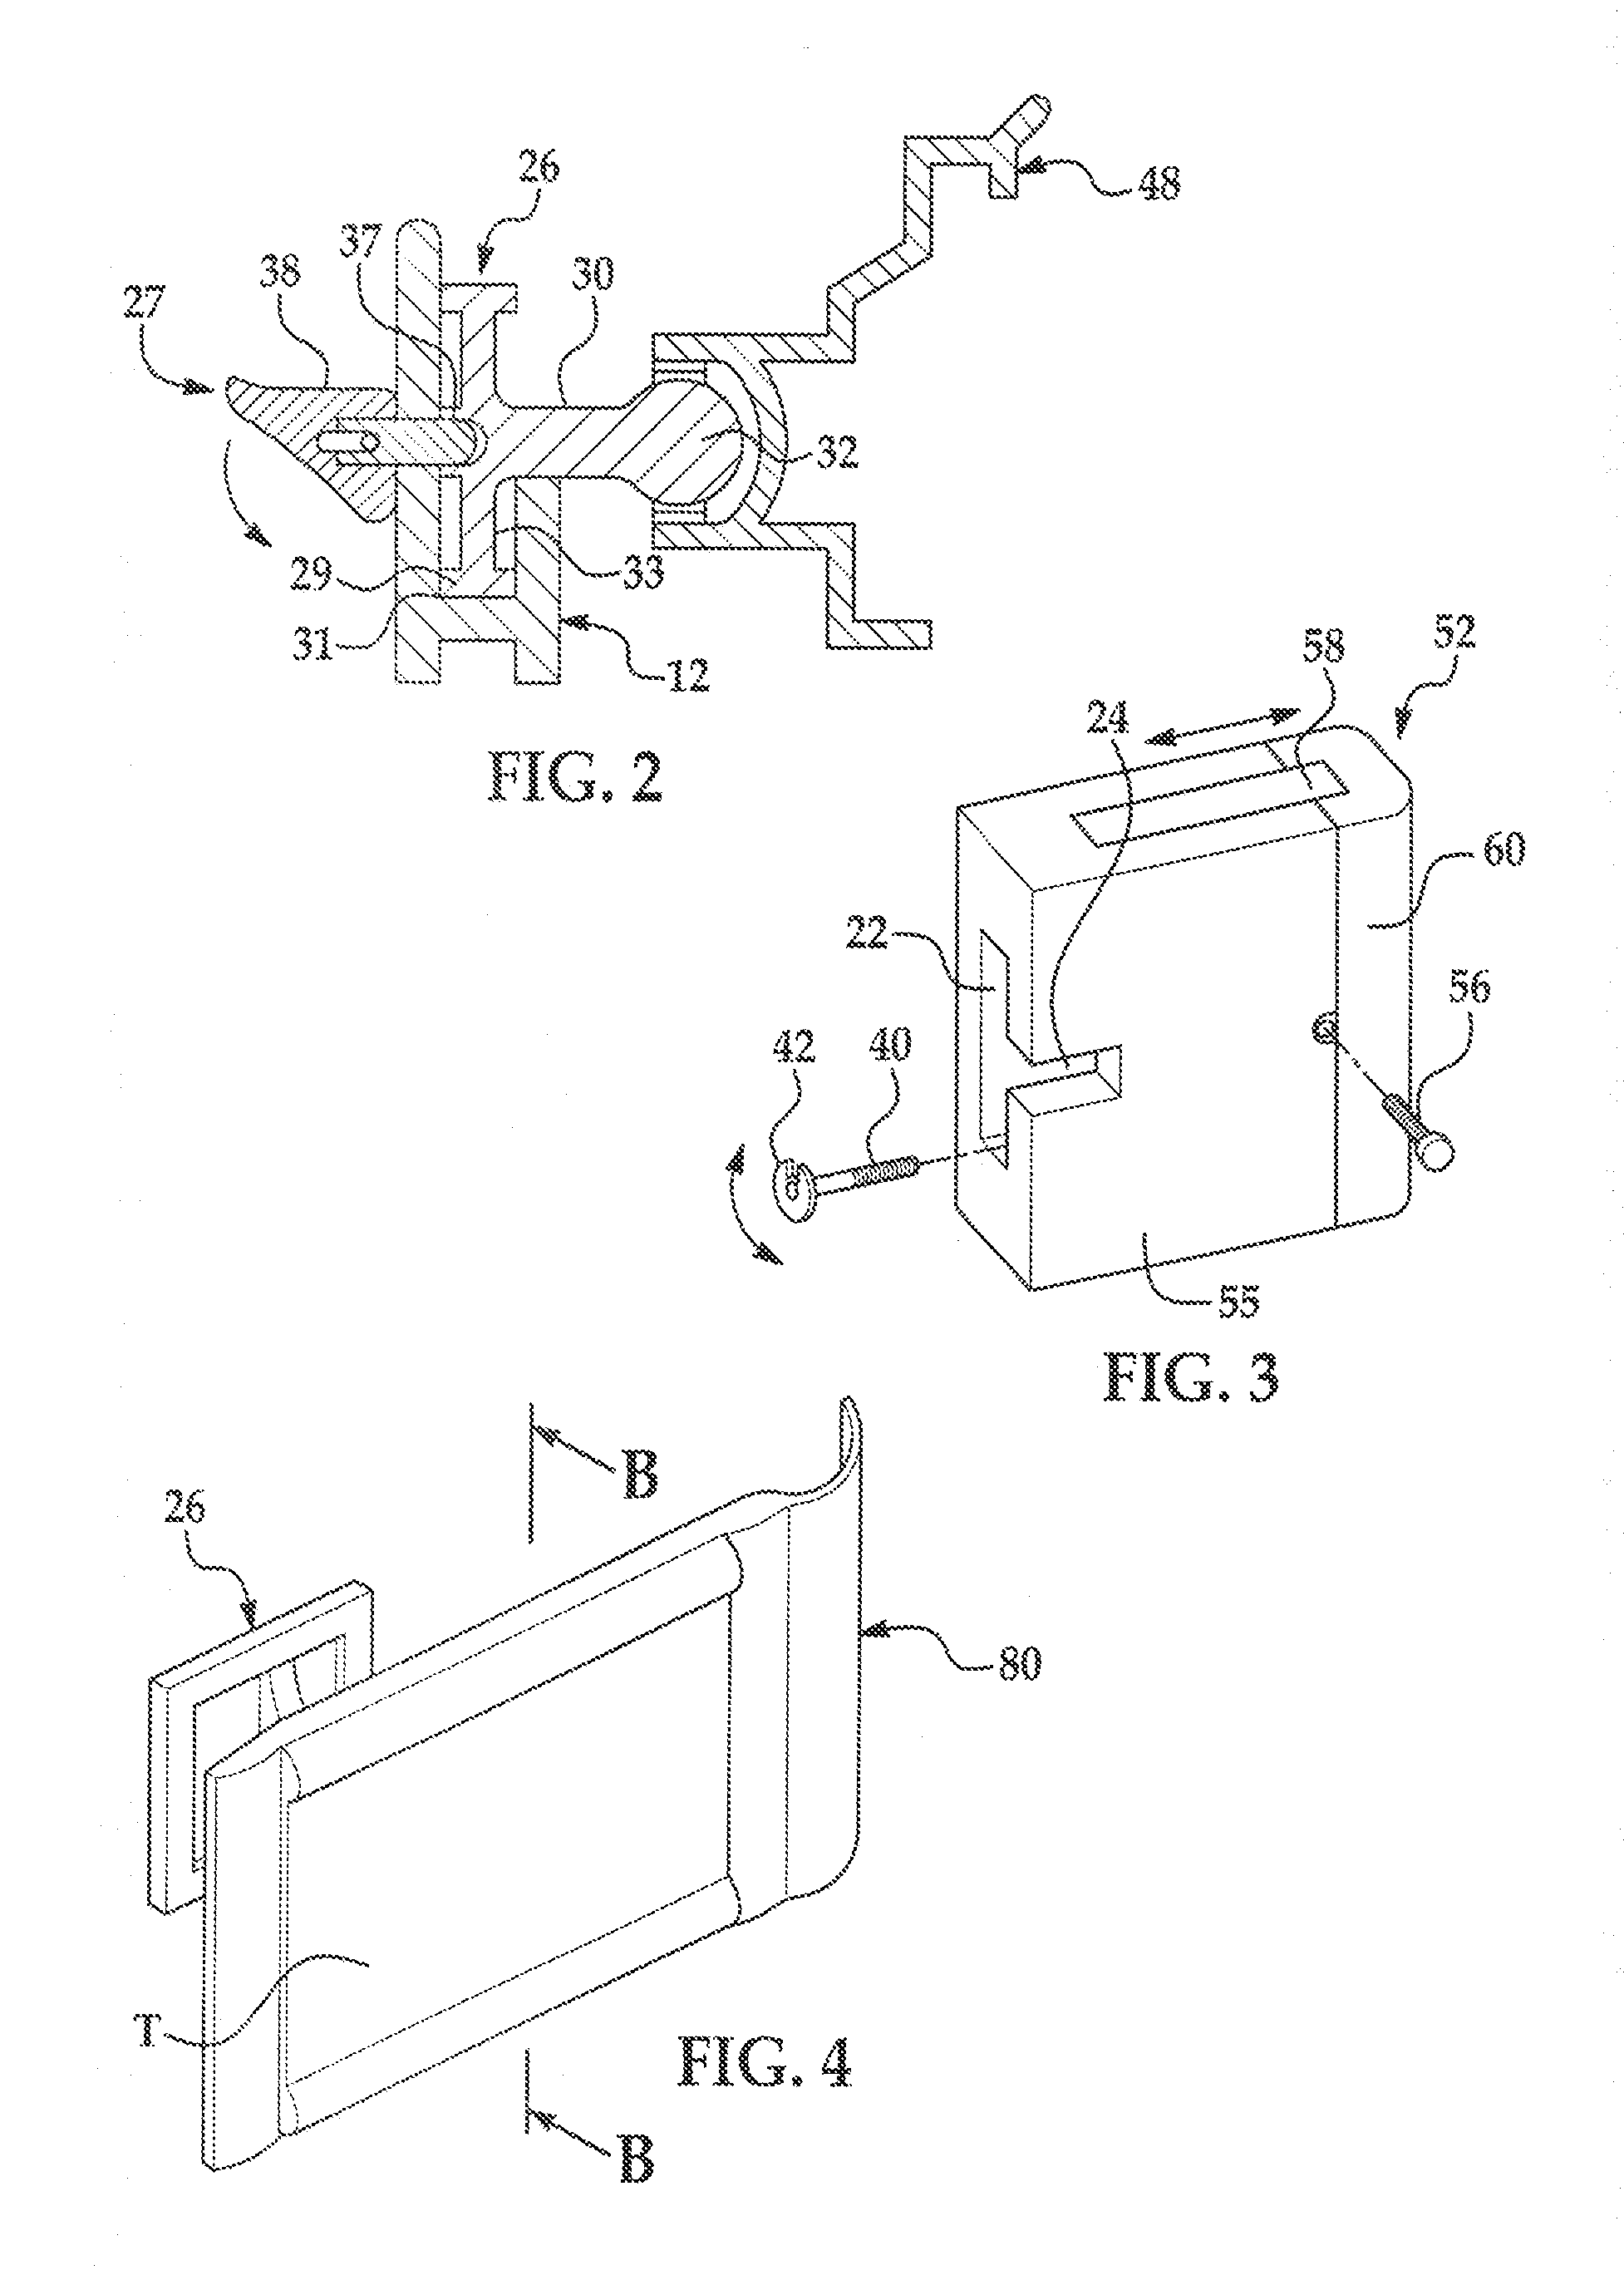 Touch screen video display device mounting system securing to vehicle seat headrest